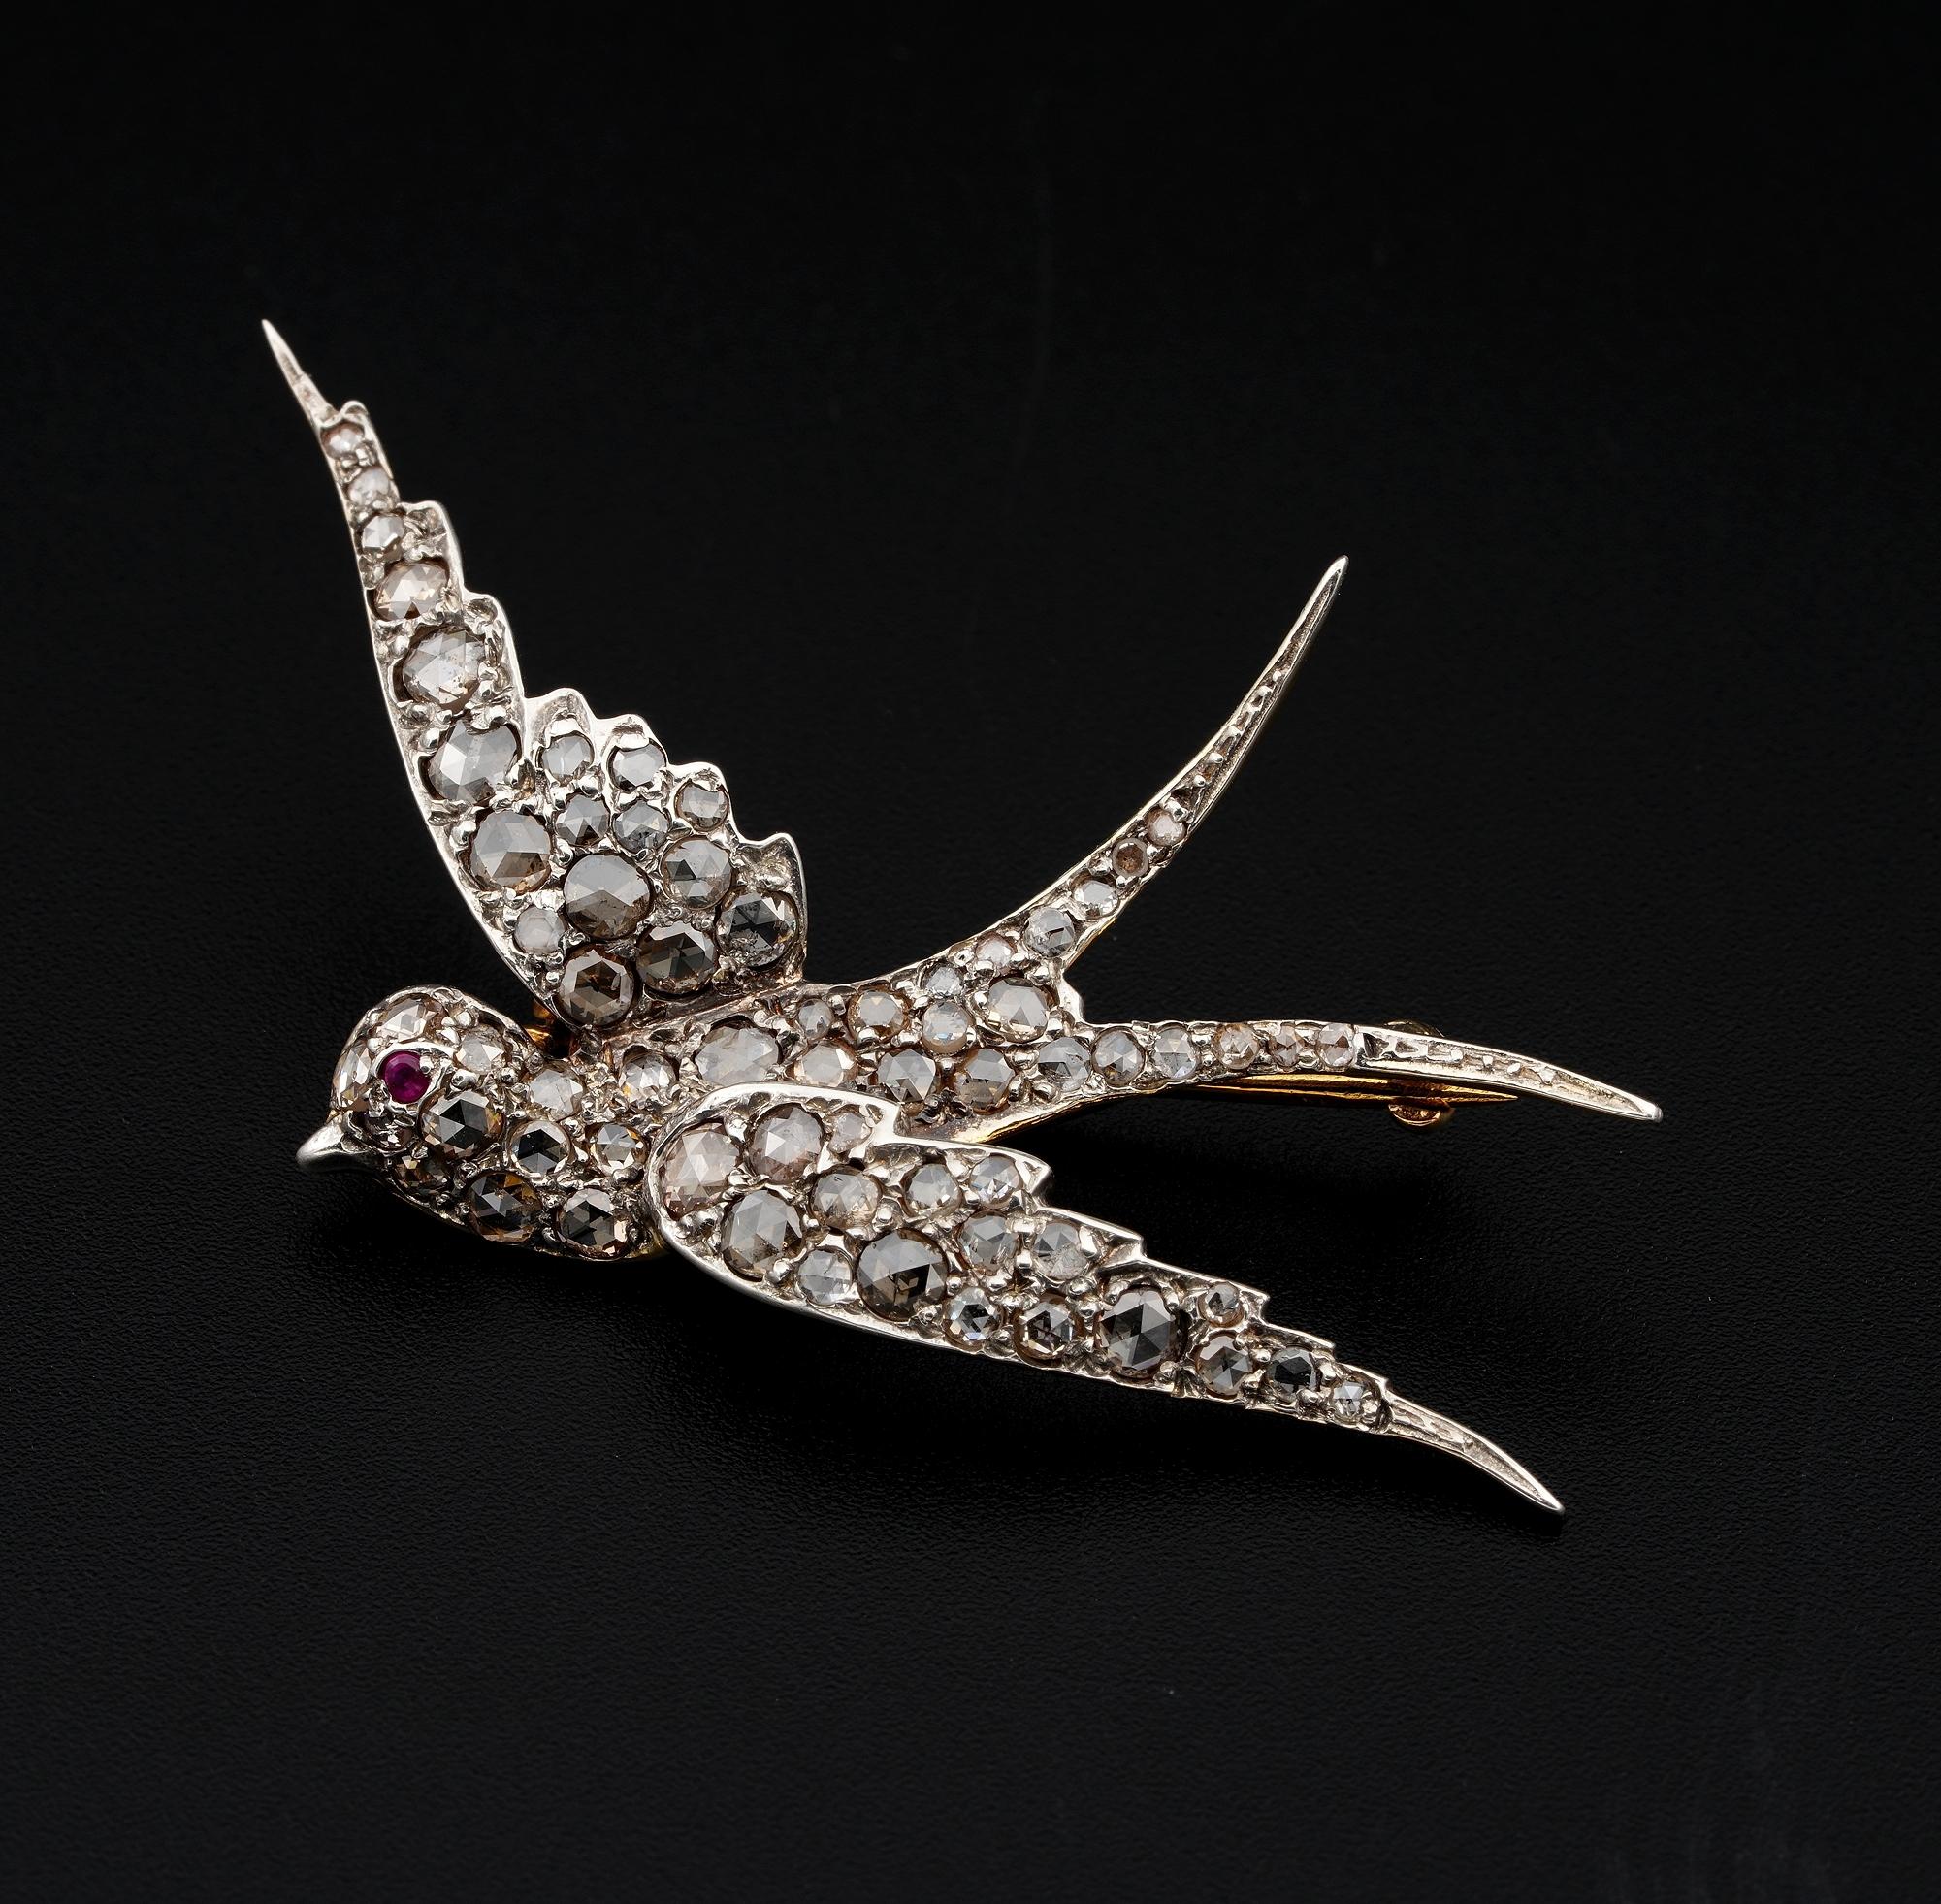 Flying Swallow
This graceful Victorian Swallow brooch is 1870 ca
Depicted with wings spread in flight, epitome of grace and beauty
Expertly rendered by the Victorian masters of solid 18 Kt gold silver topped
It is completely highlighted by rose cut